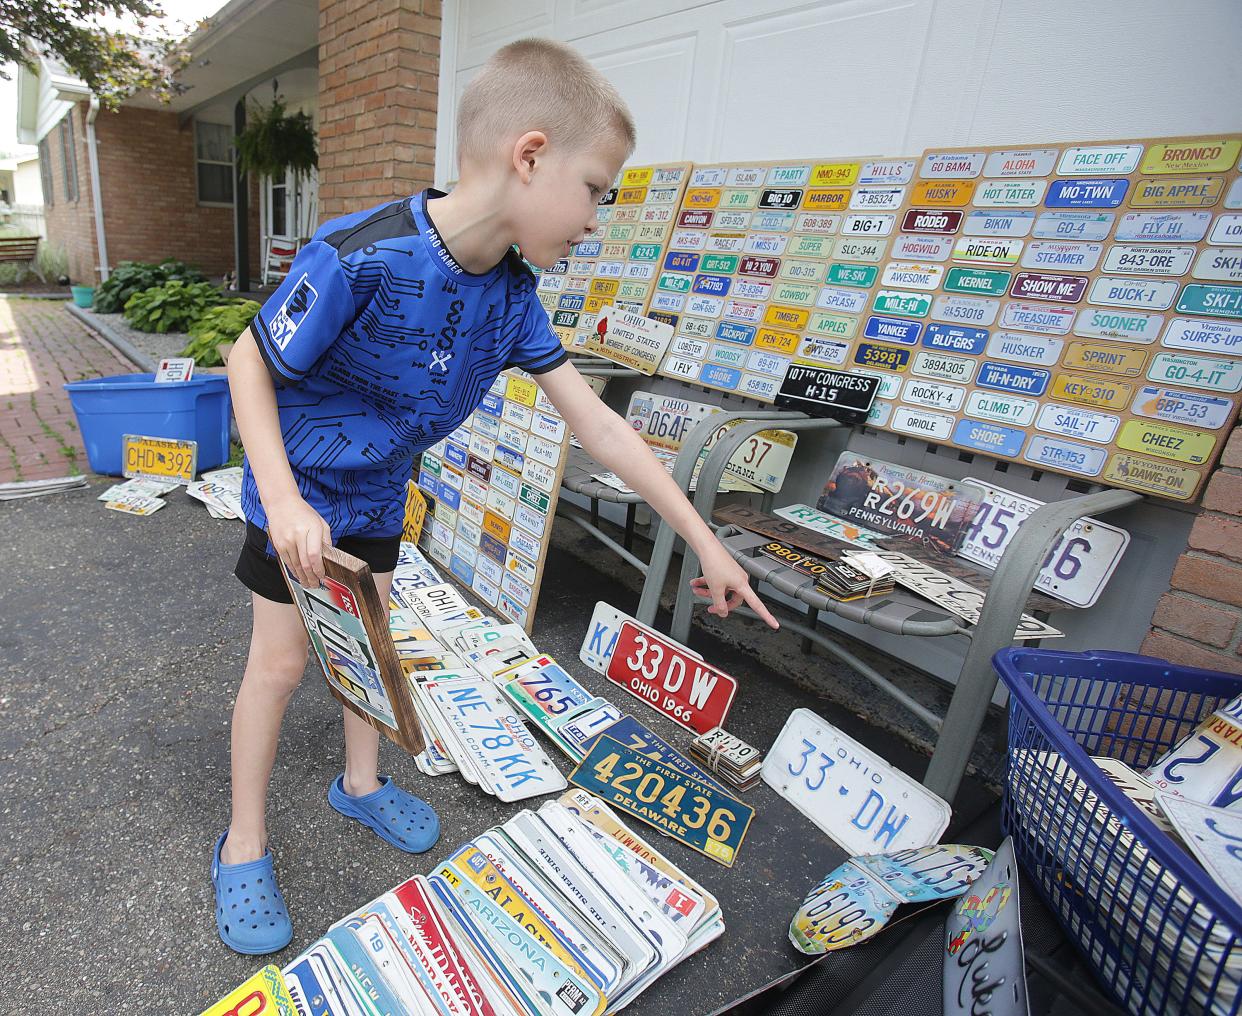 Luke Reicosky, 7, shows off dozens of his new  license plates Wednesday at his home in Brewster. Luke has received numerous plates in the mail or via special delivery since a news story ran June 21 about his collection.